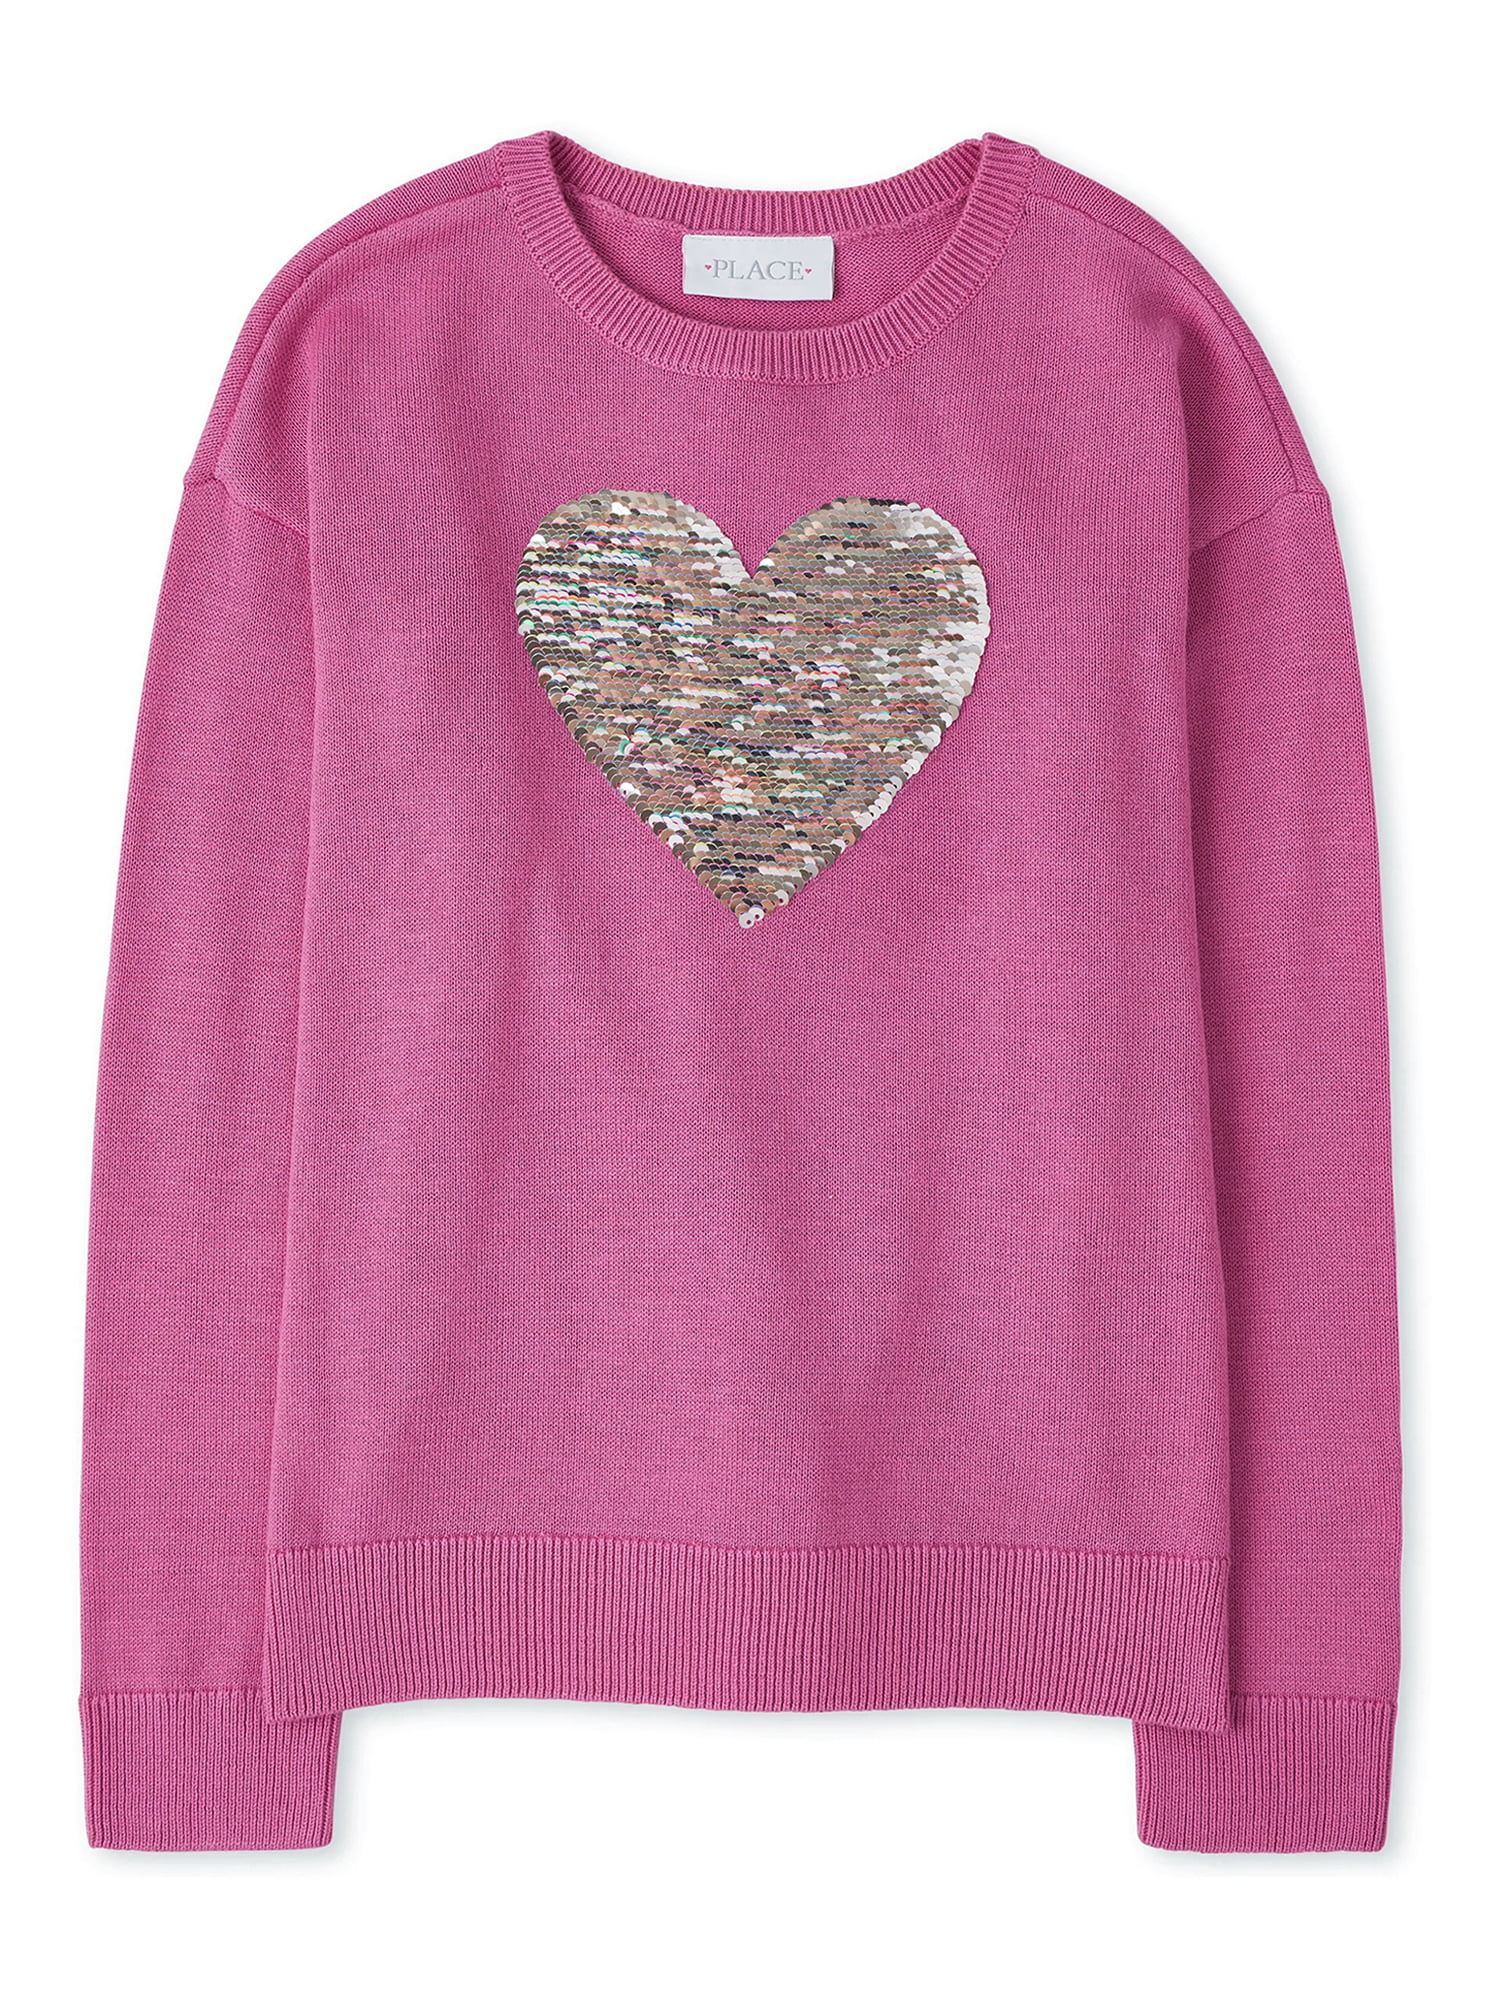 The Childrens Place Girls Sweater 